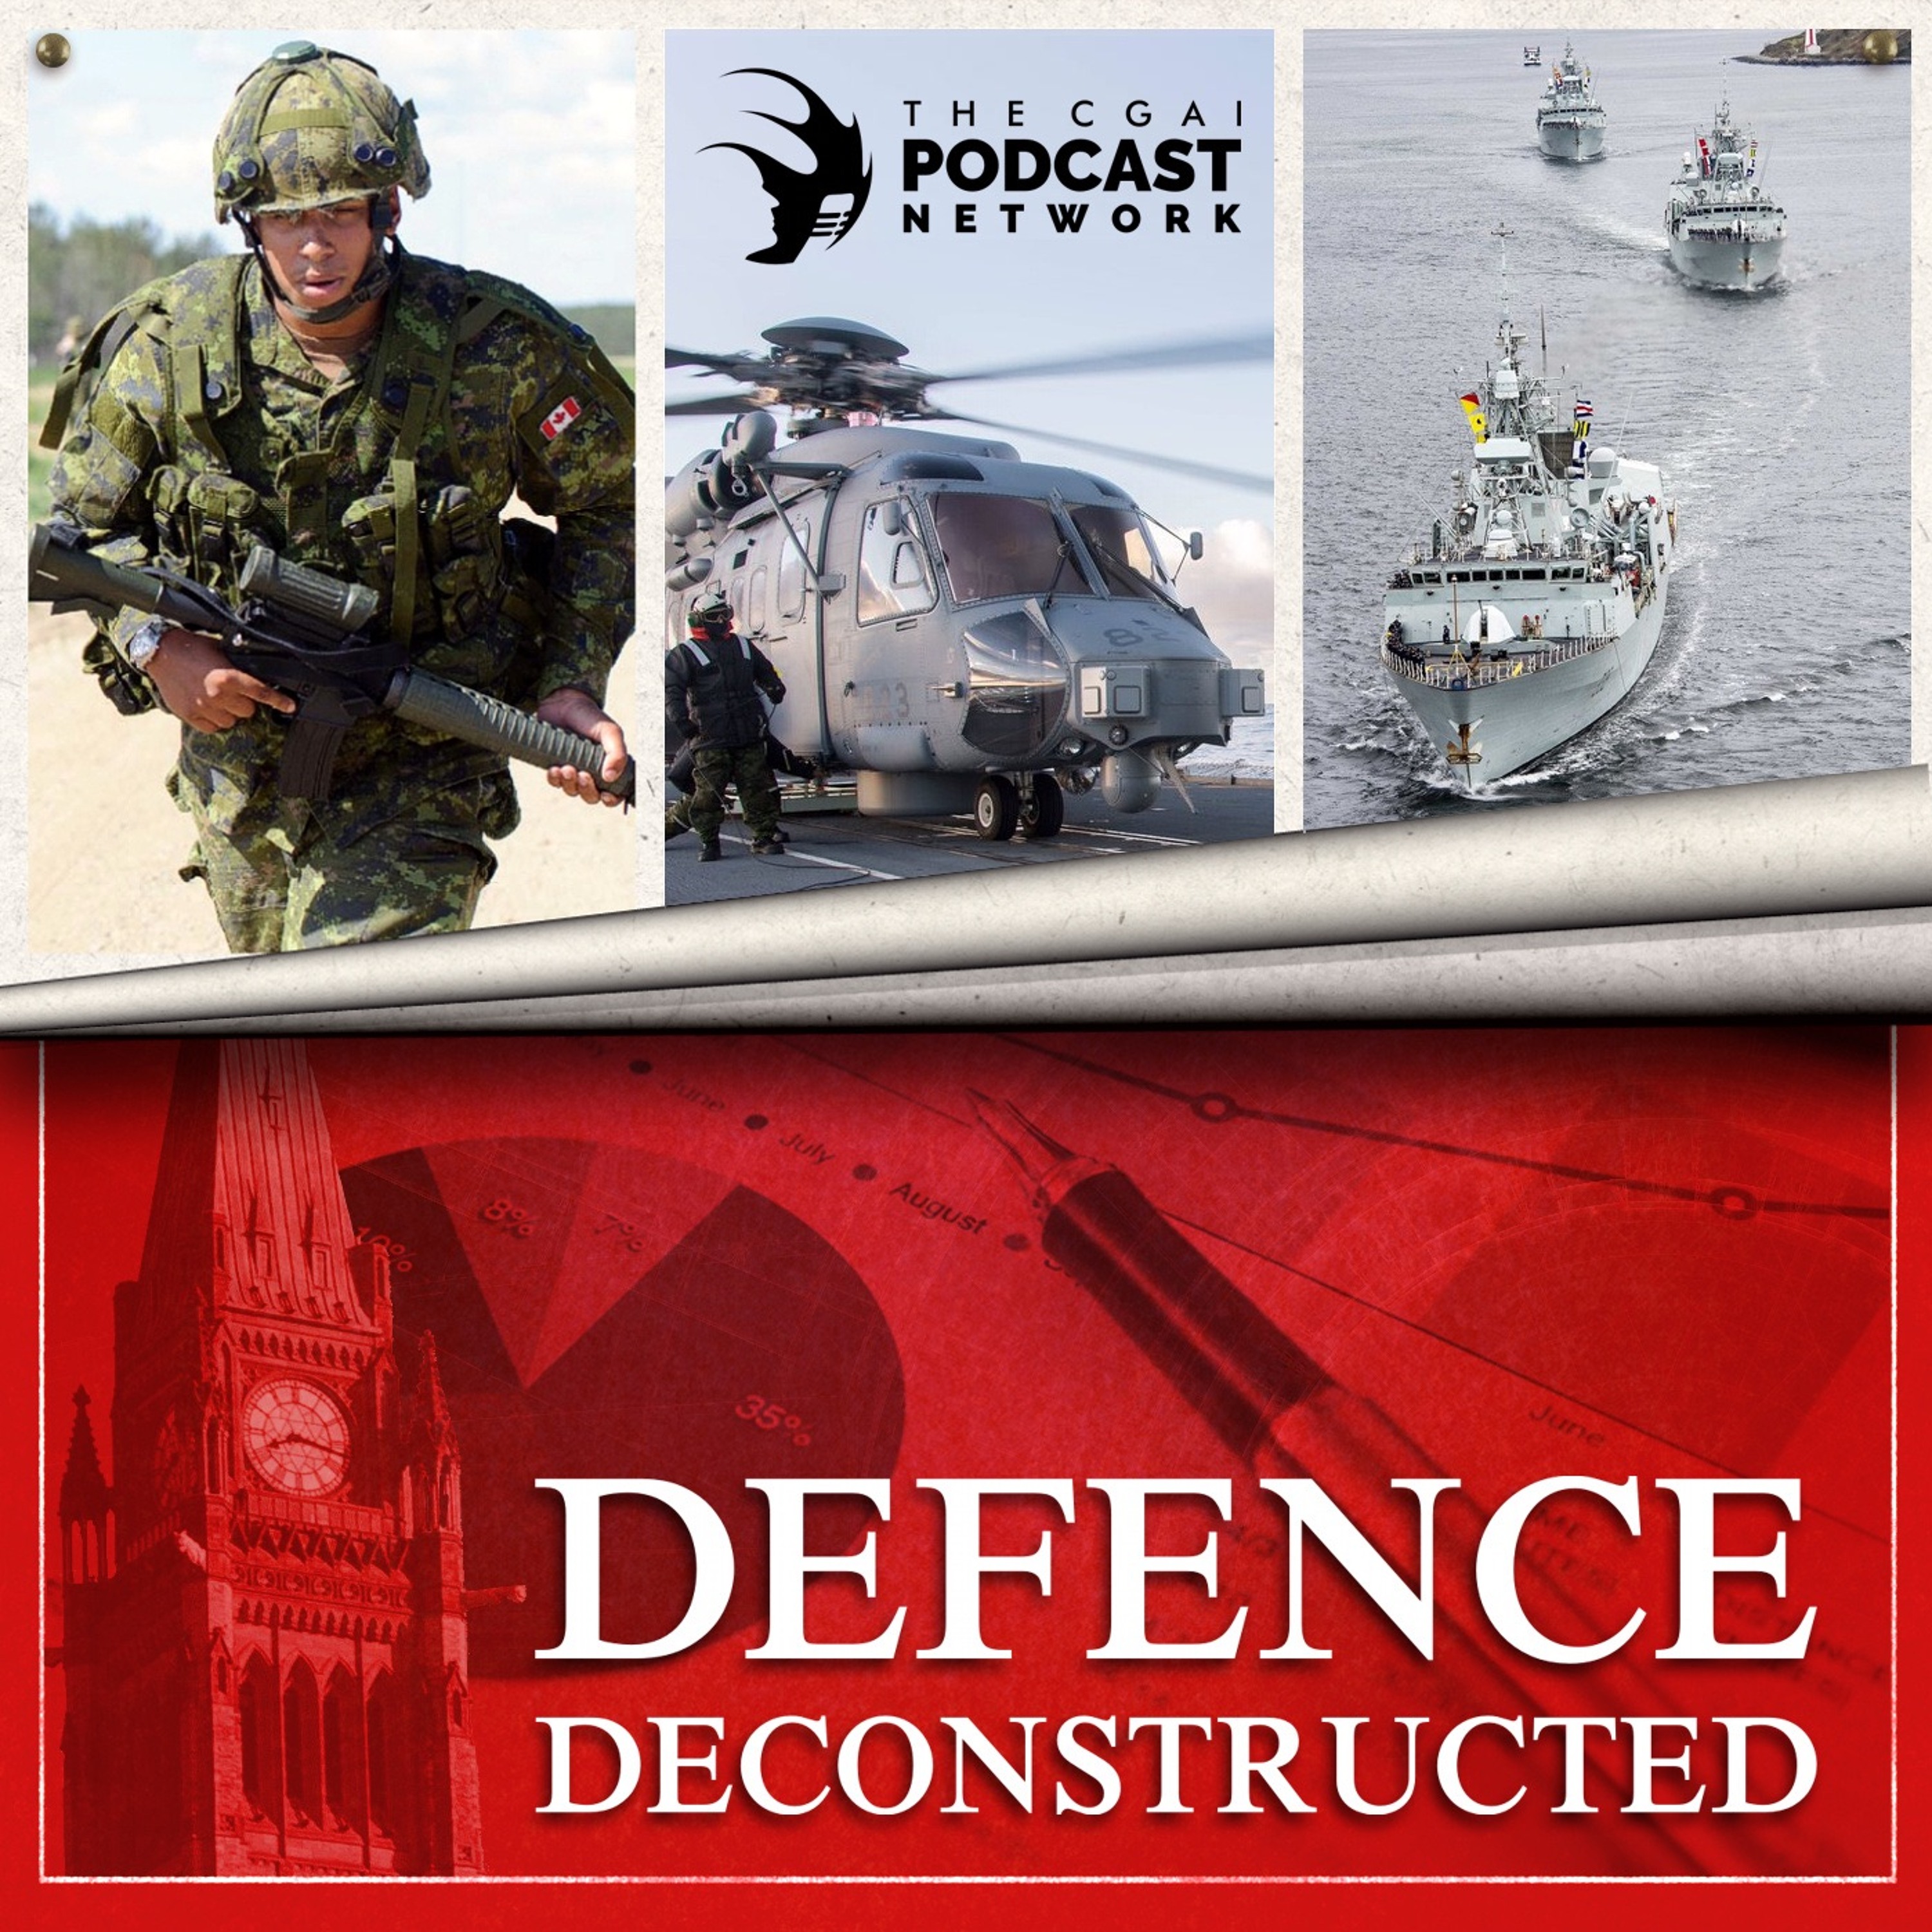 Defence Deconstructed: Deterrence in Latvia feat. Gen Eyre